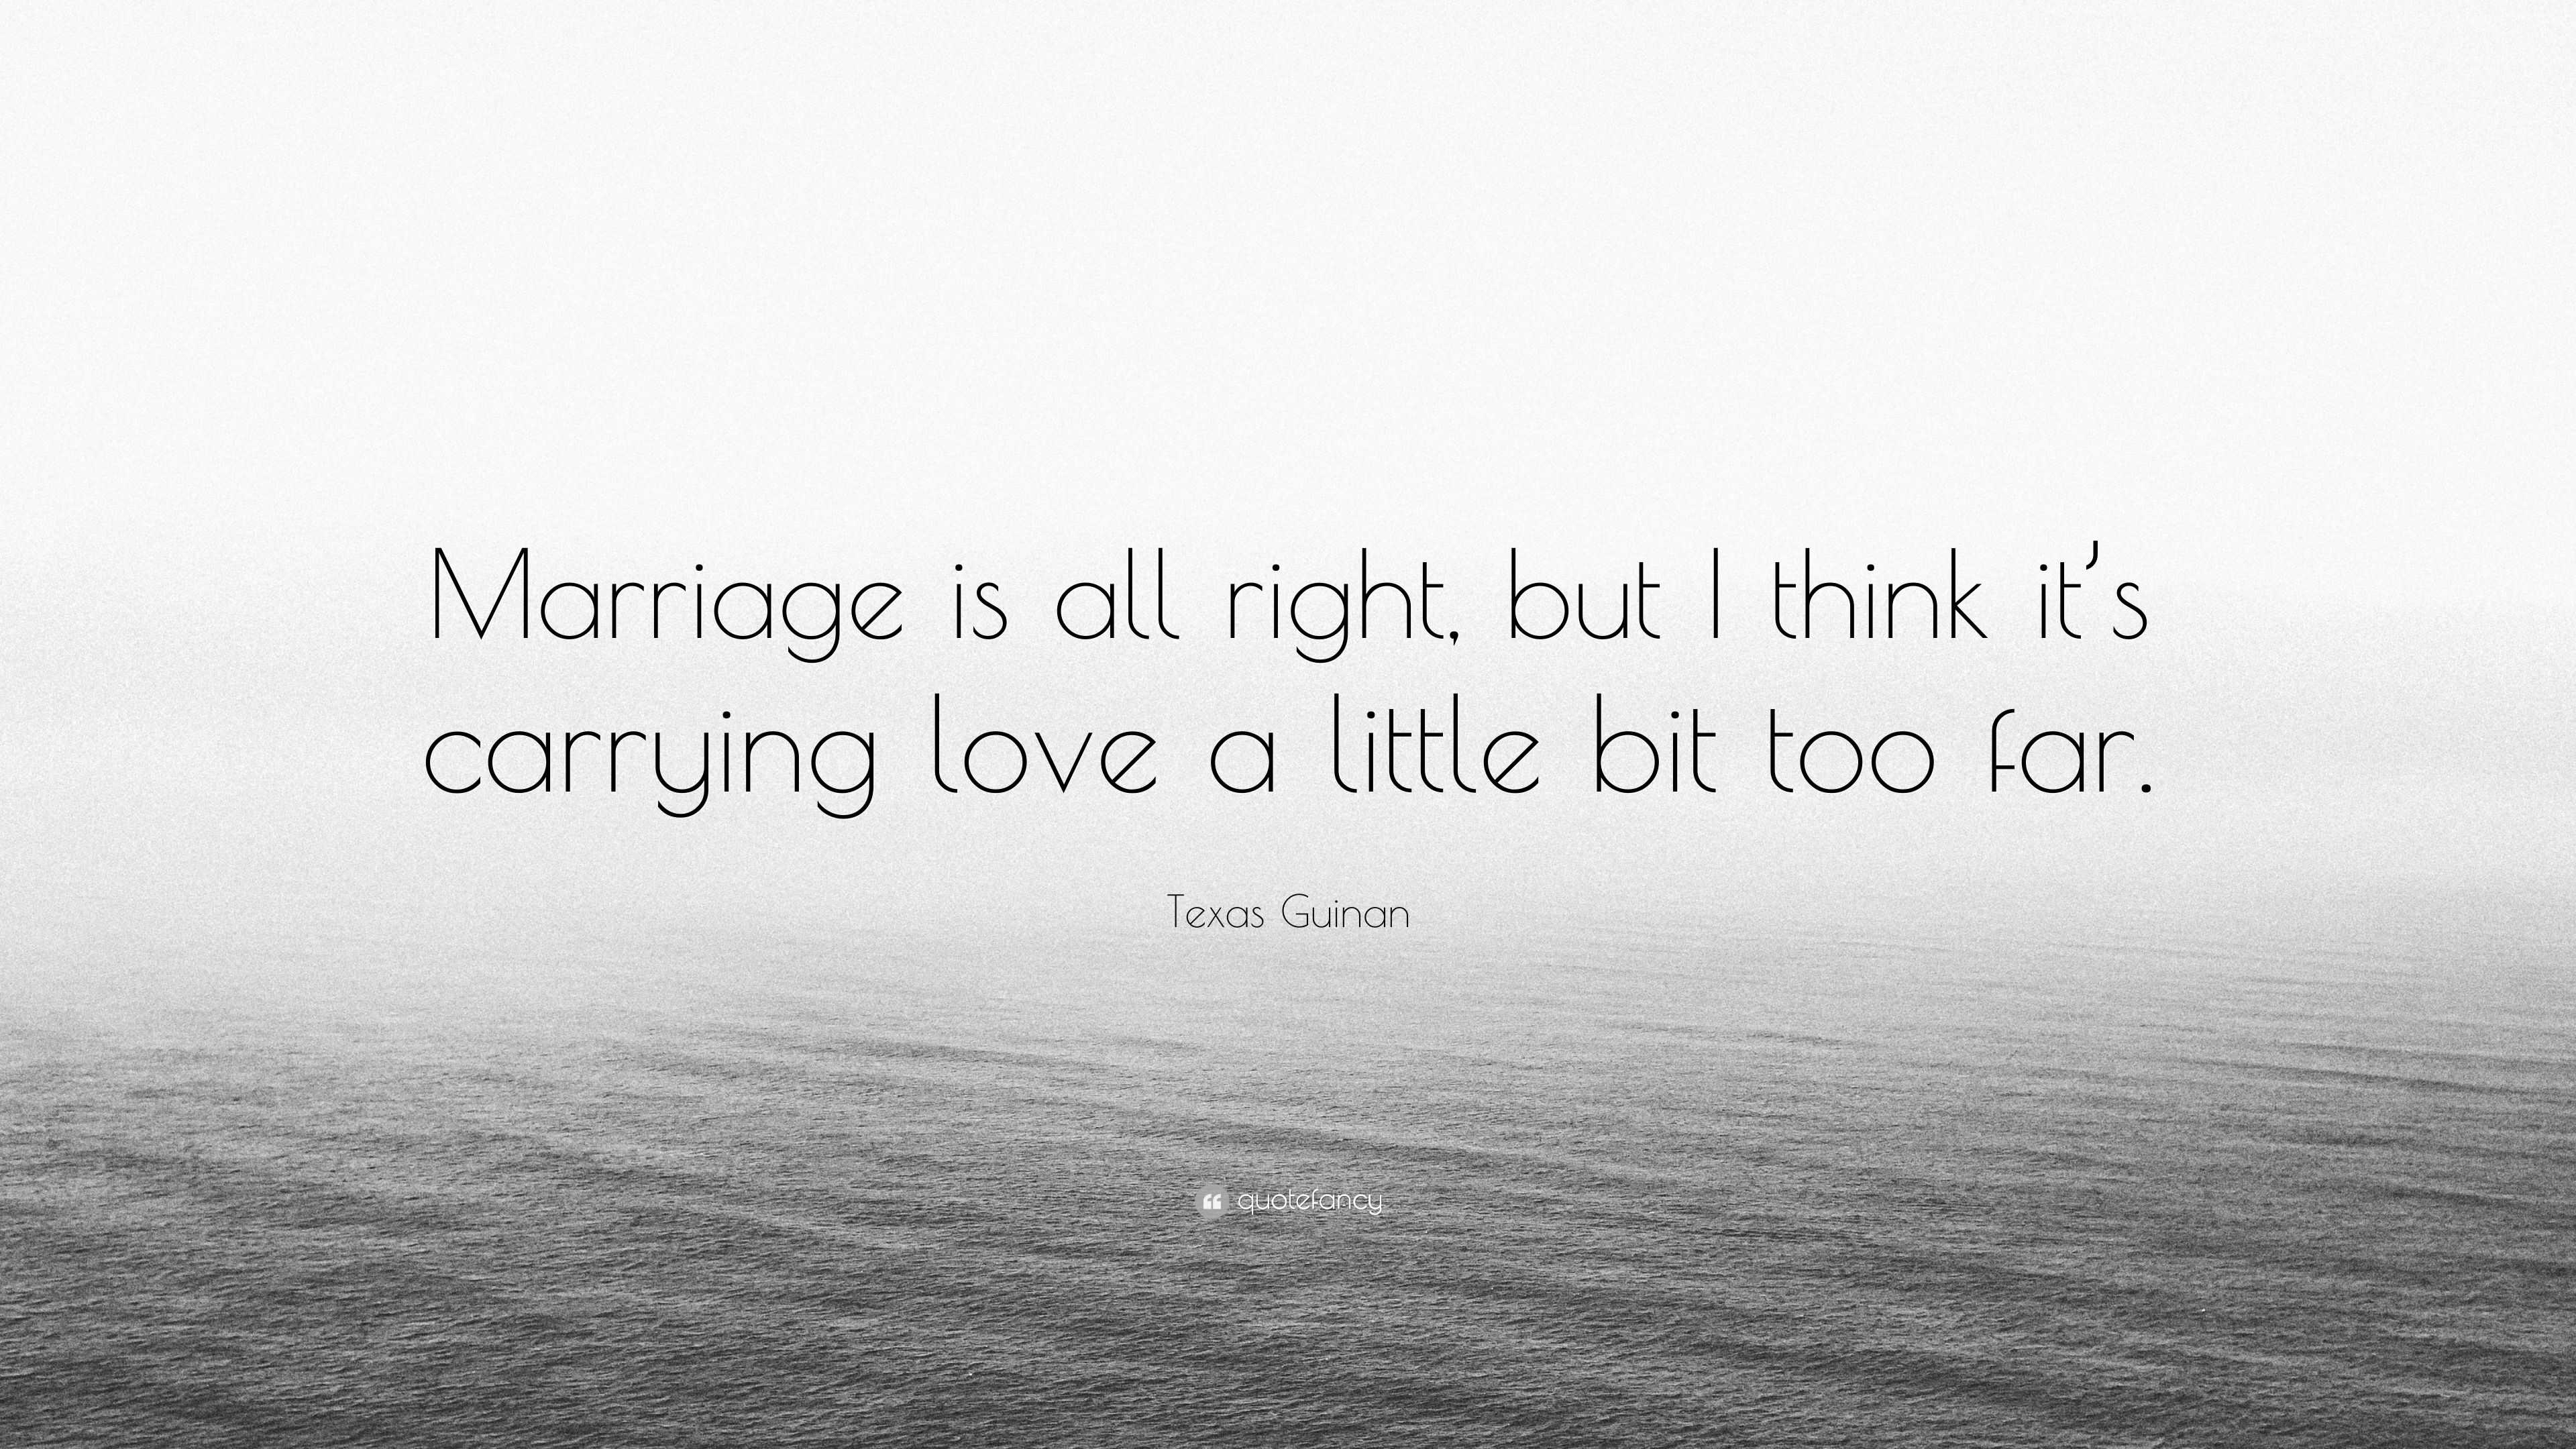 Texas Guinan Quote: “Marriage is all right, but I think it’s carrying ...